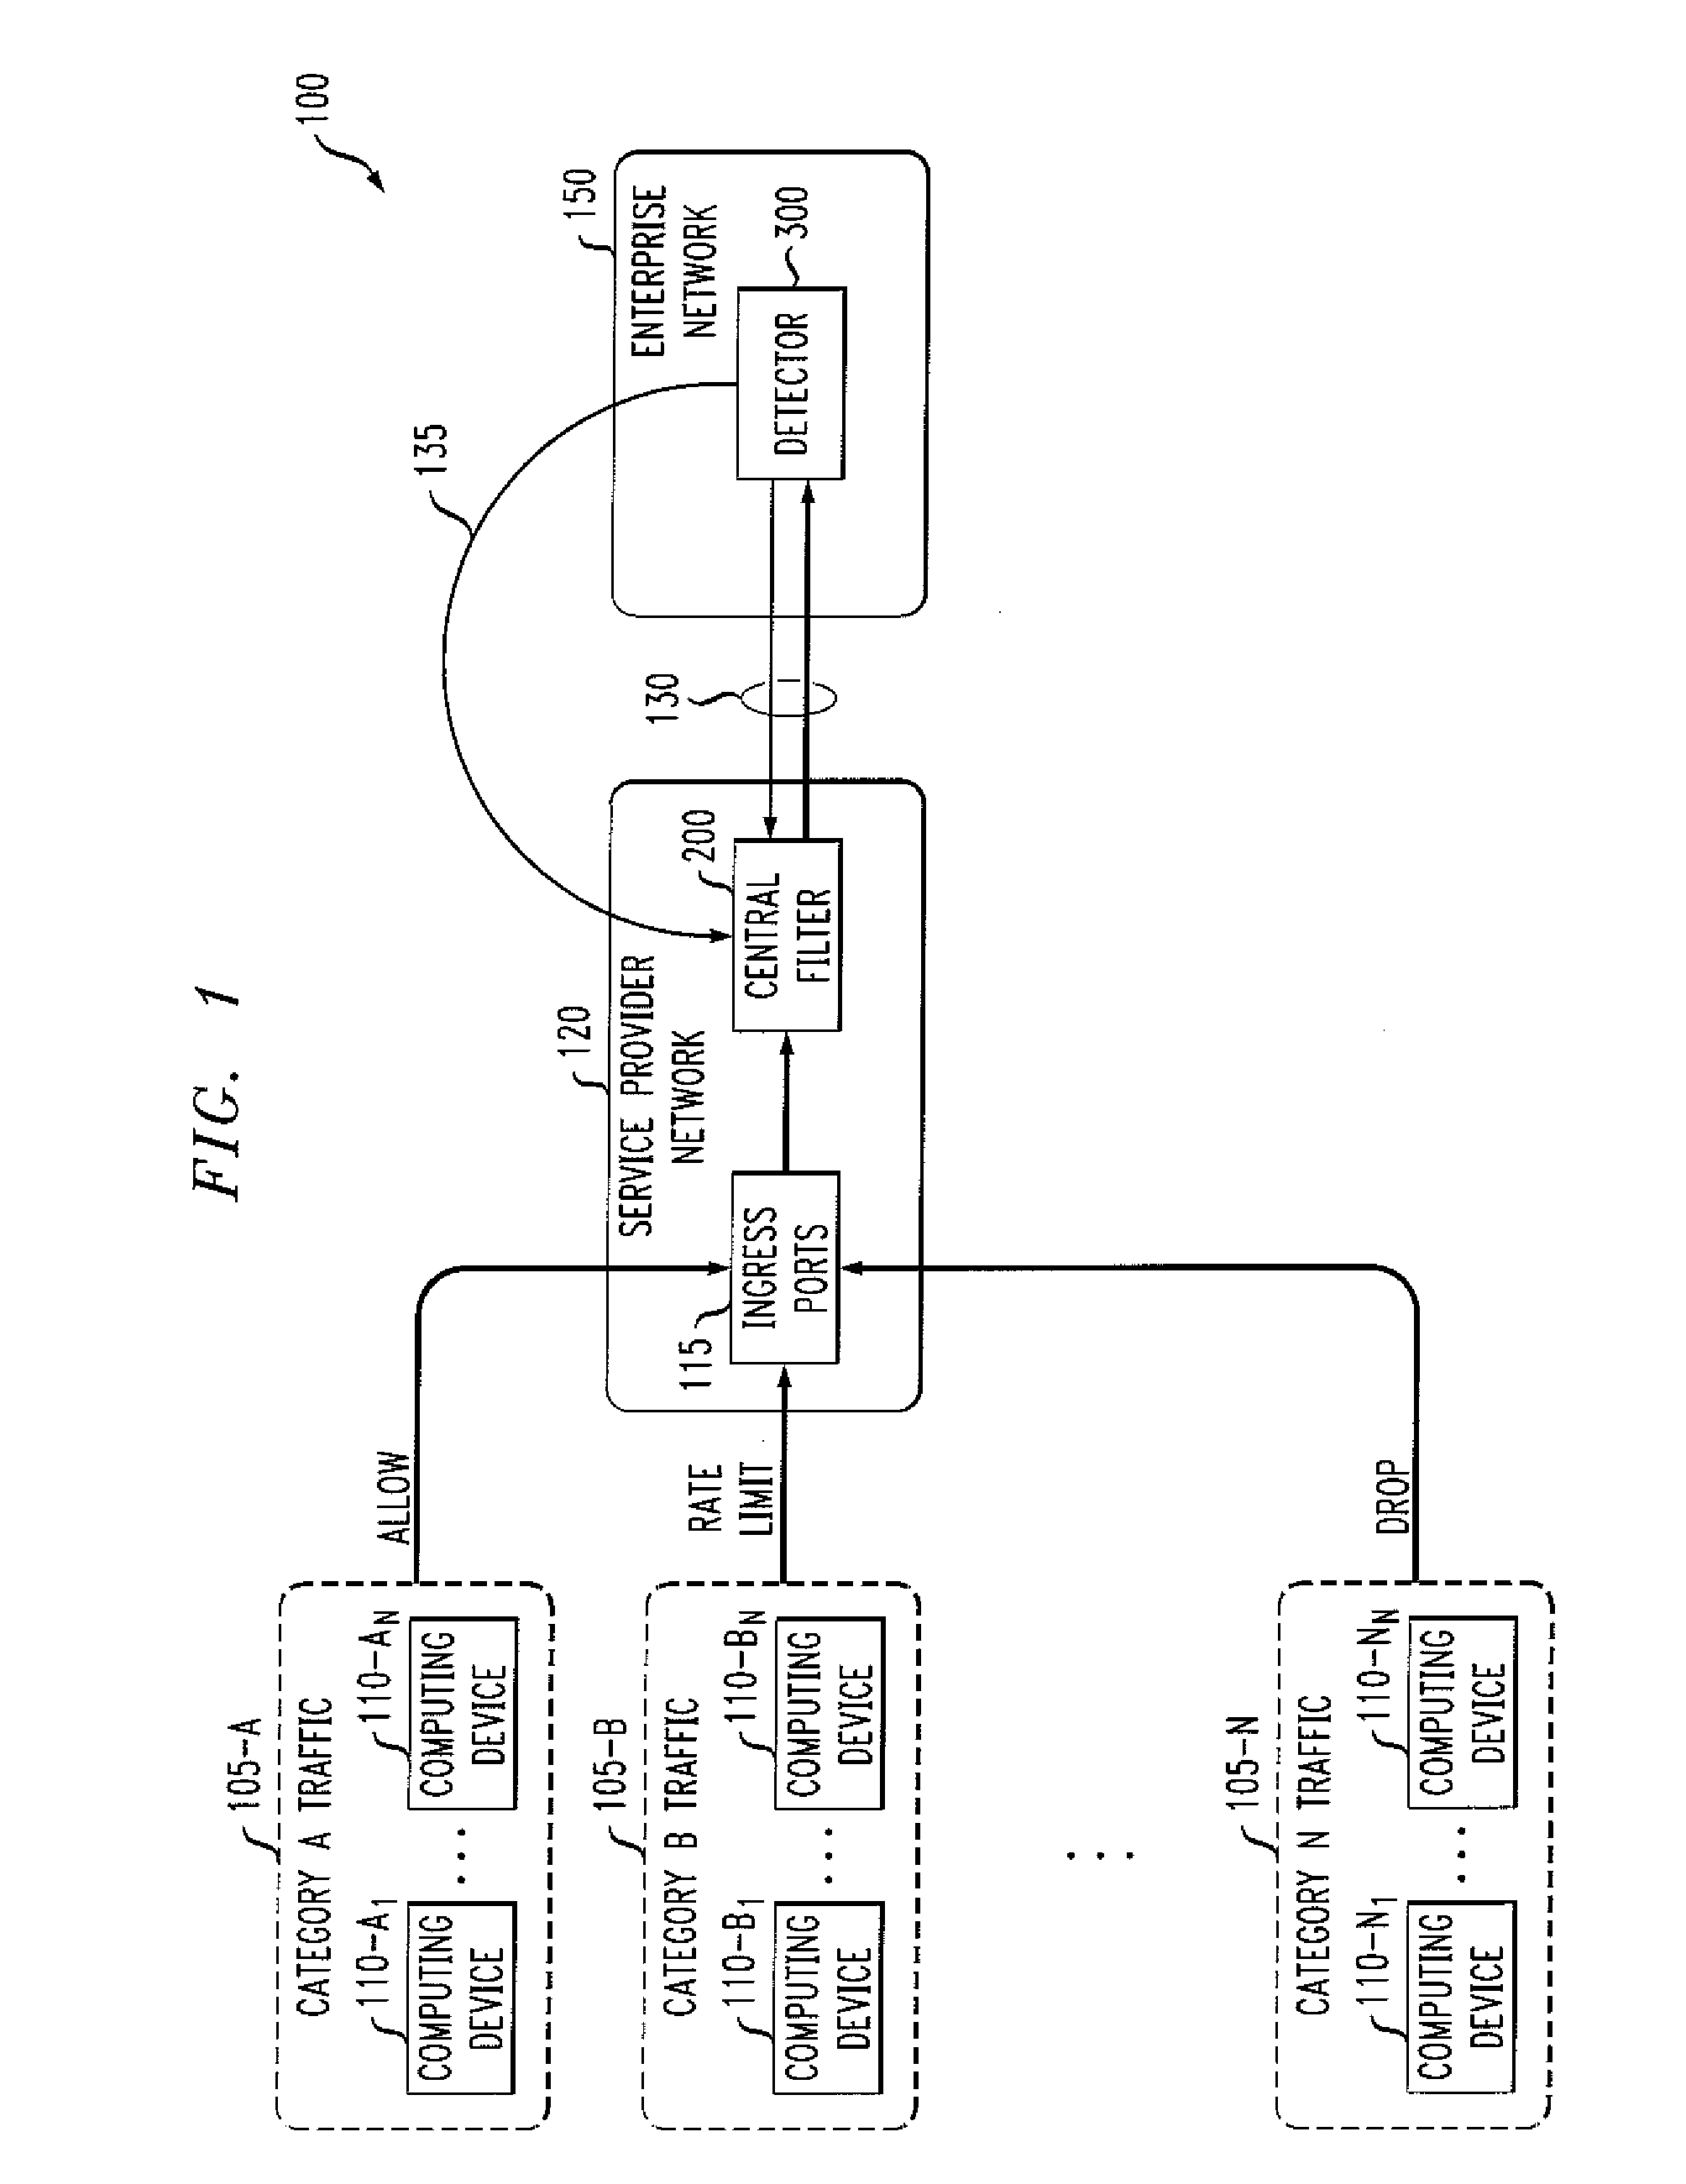 Methods and apparatus for detecting unwanted traffic in one or more packet networks utilizing string analysis